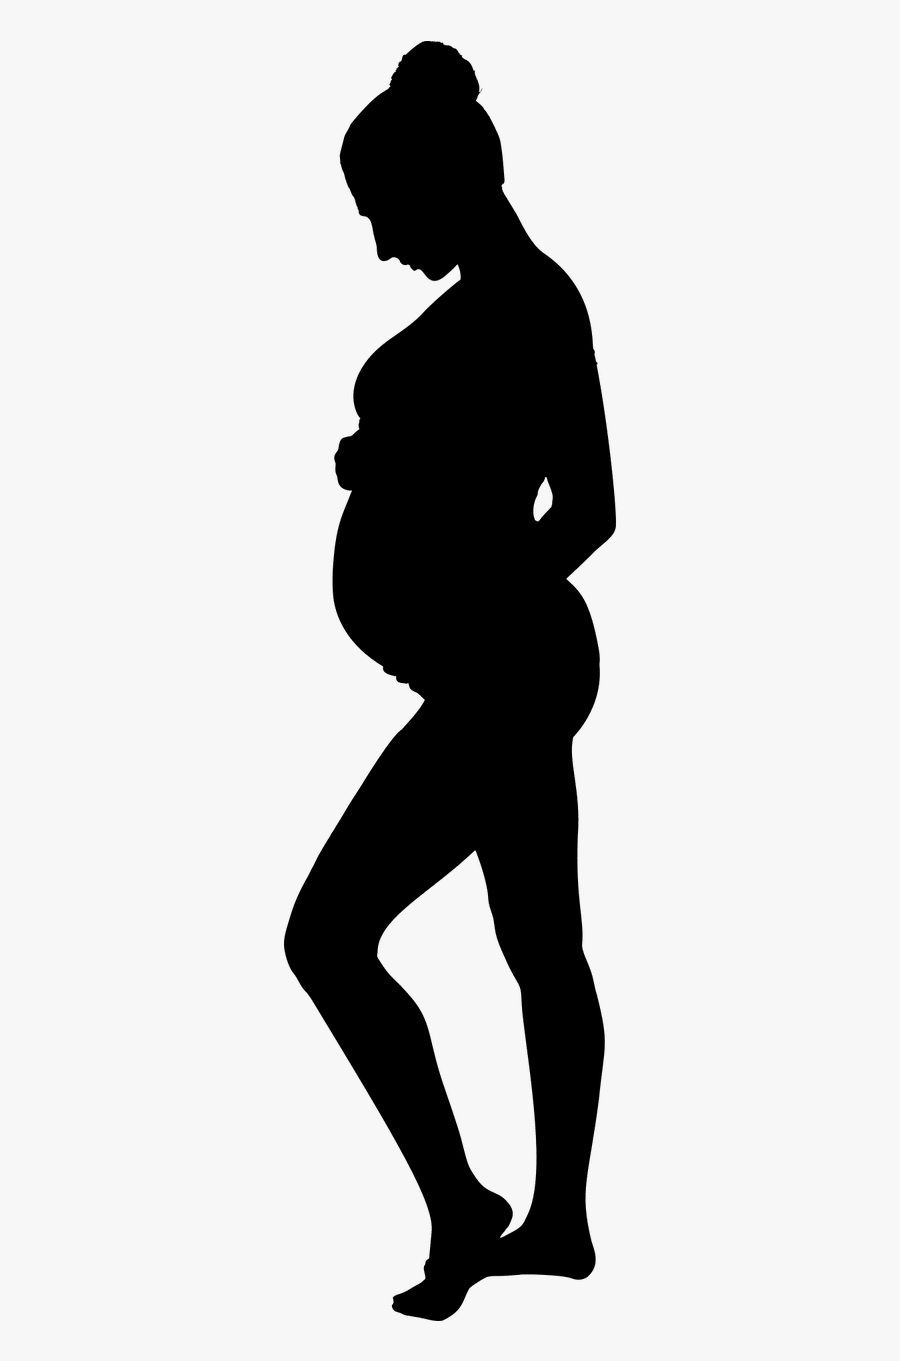 Pregnancy Silhouette Icons Png - Pregnant Woman Silhouette Png, Transparent Clipart